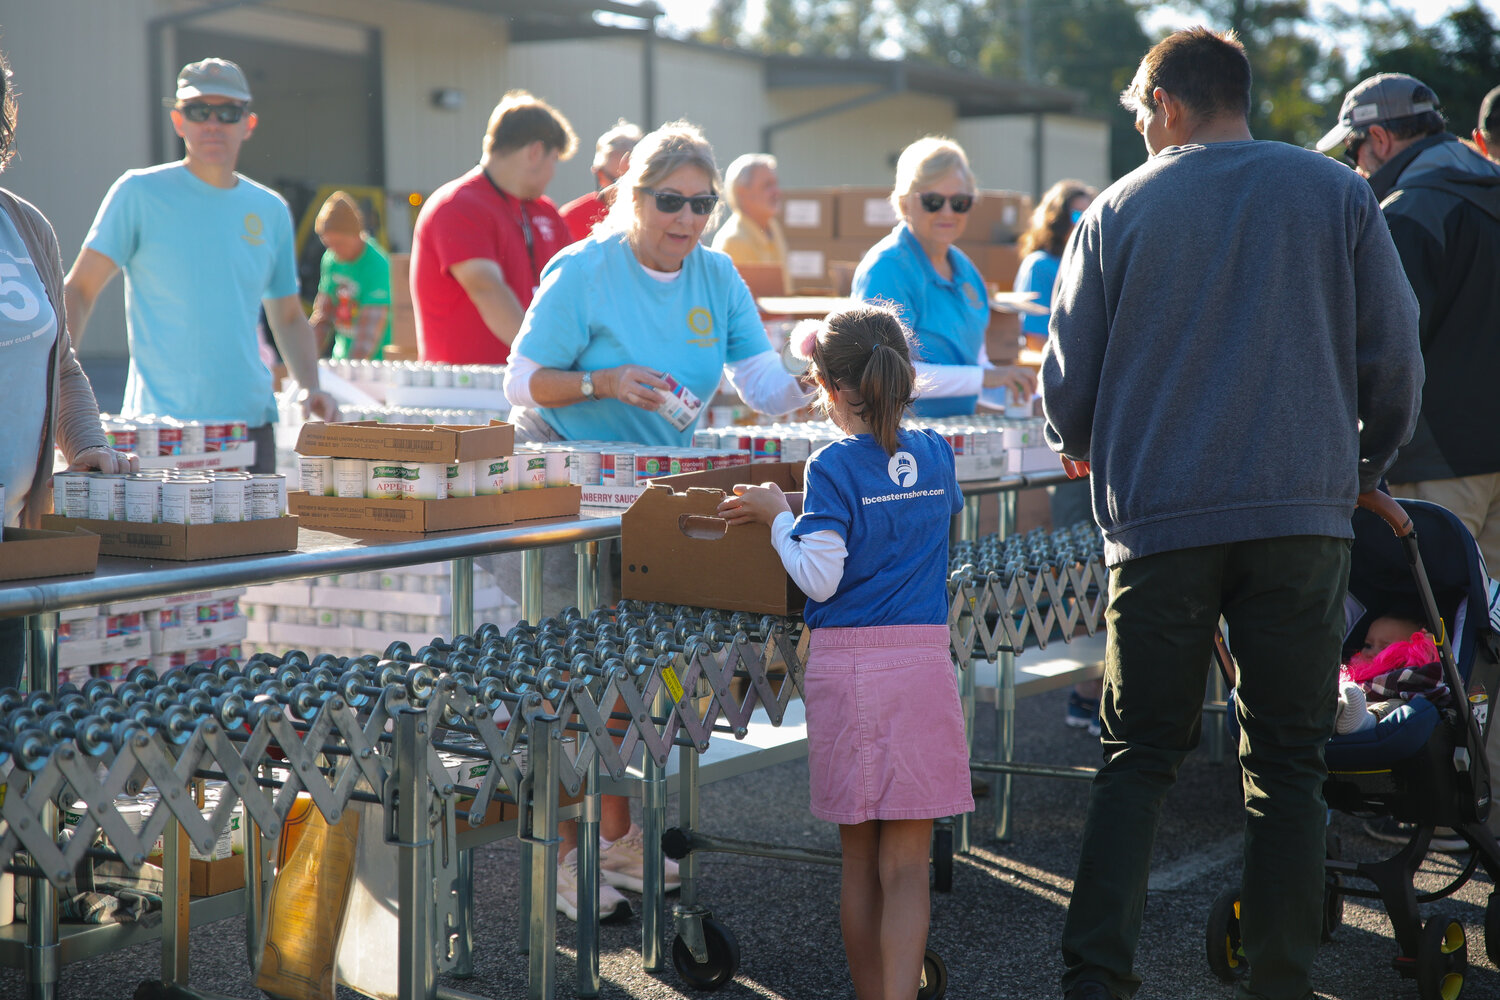 As volunteers formed a line around the Prodisee Pantry parking lot on the morning of Nov. 4, boxes of food such as rice, dressing and more would be loaded into cardboard boxes.